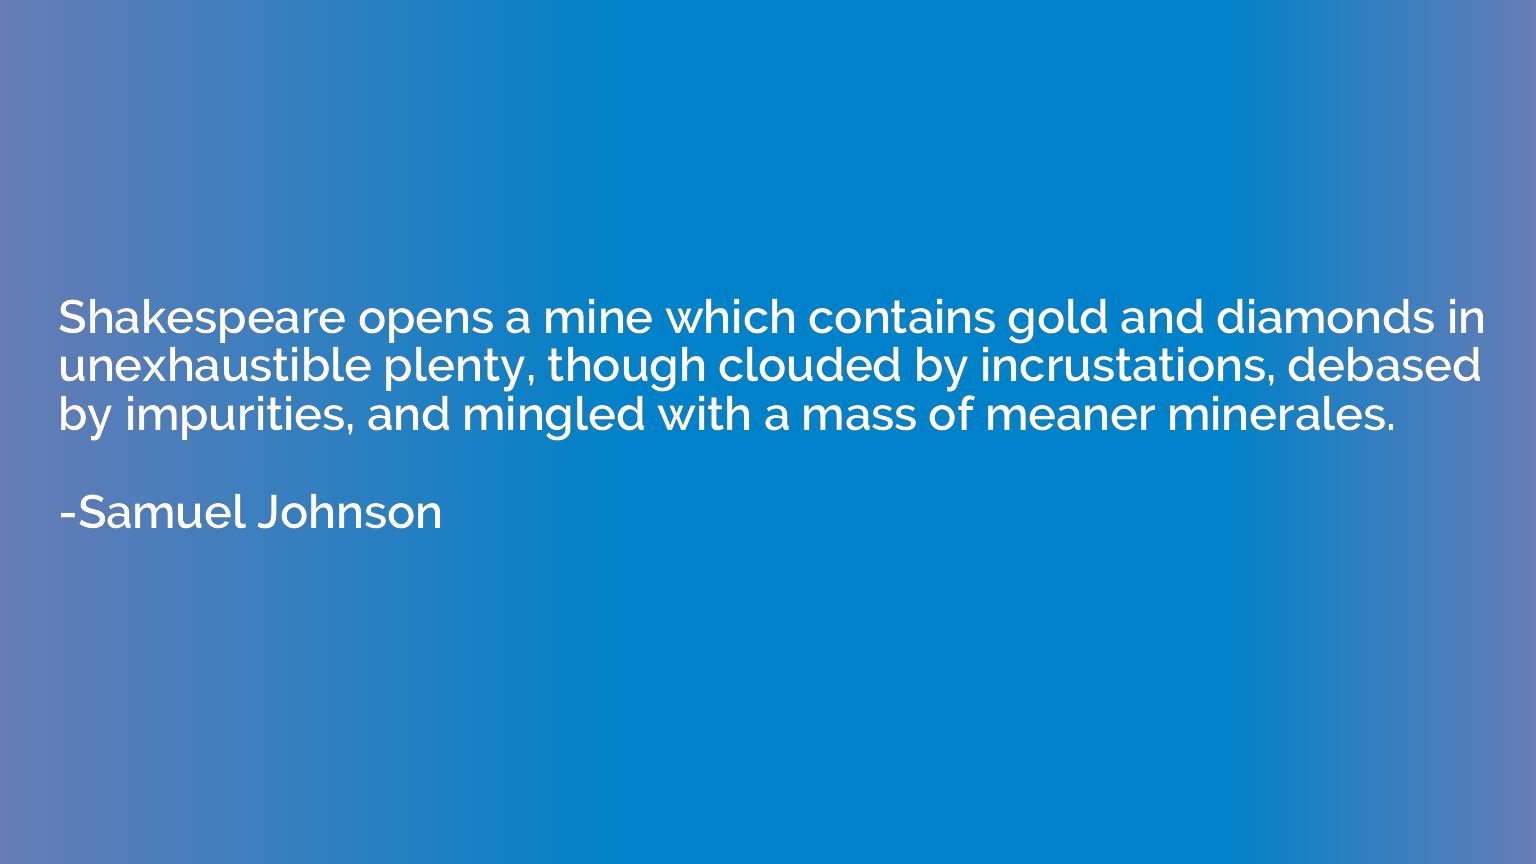 Shakespeare opens a mine which contains gold and diamonds in